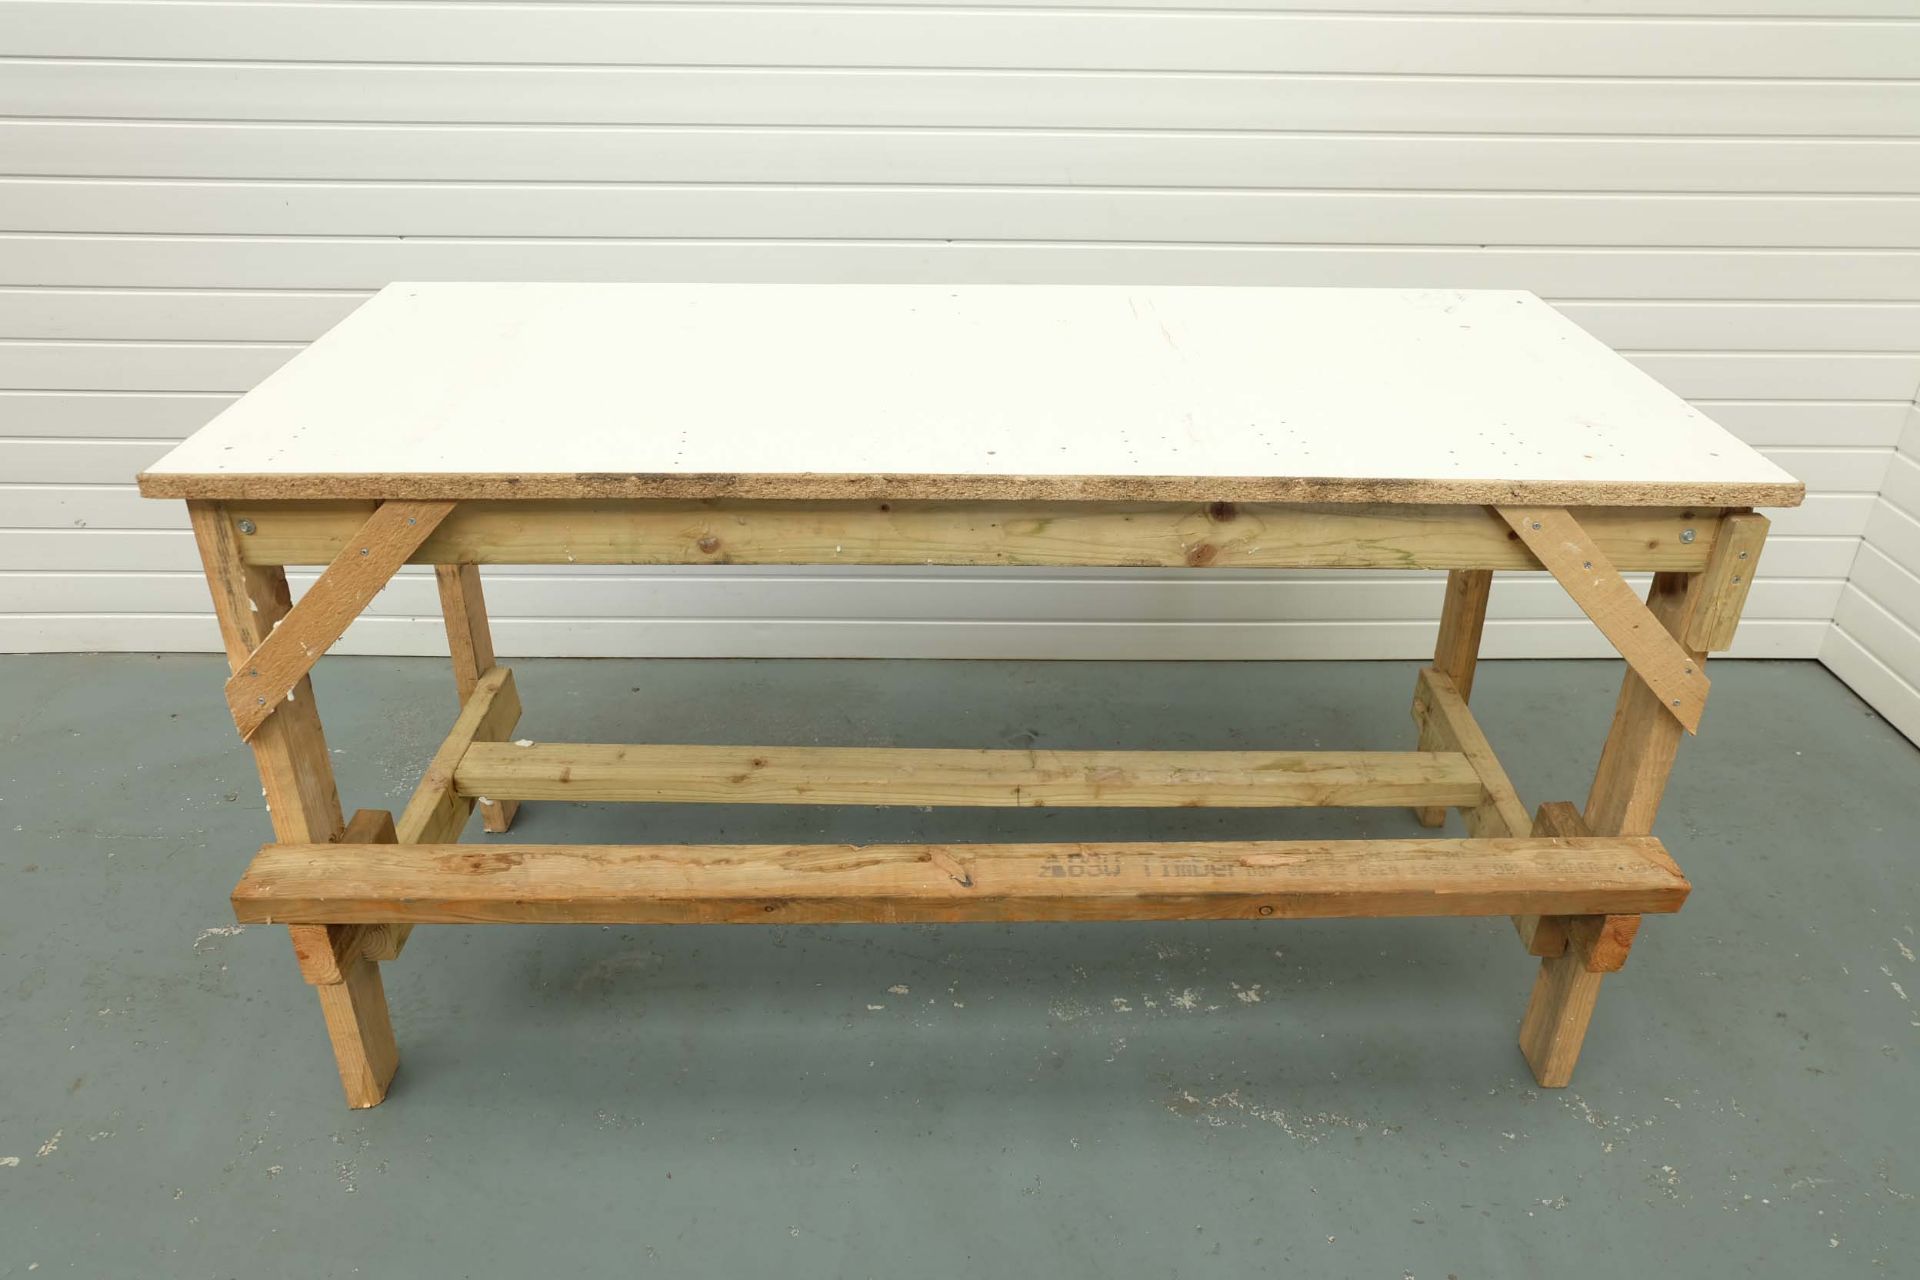 Timber Work Bench. Size 68" x 30"